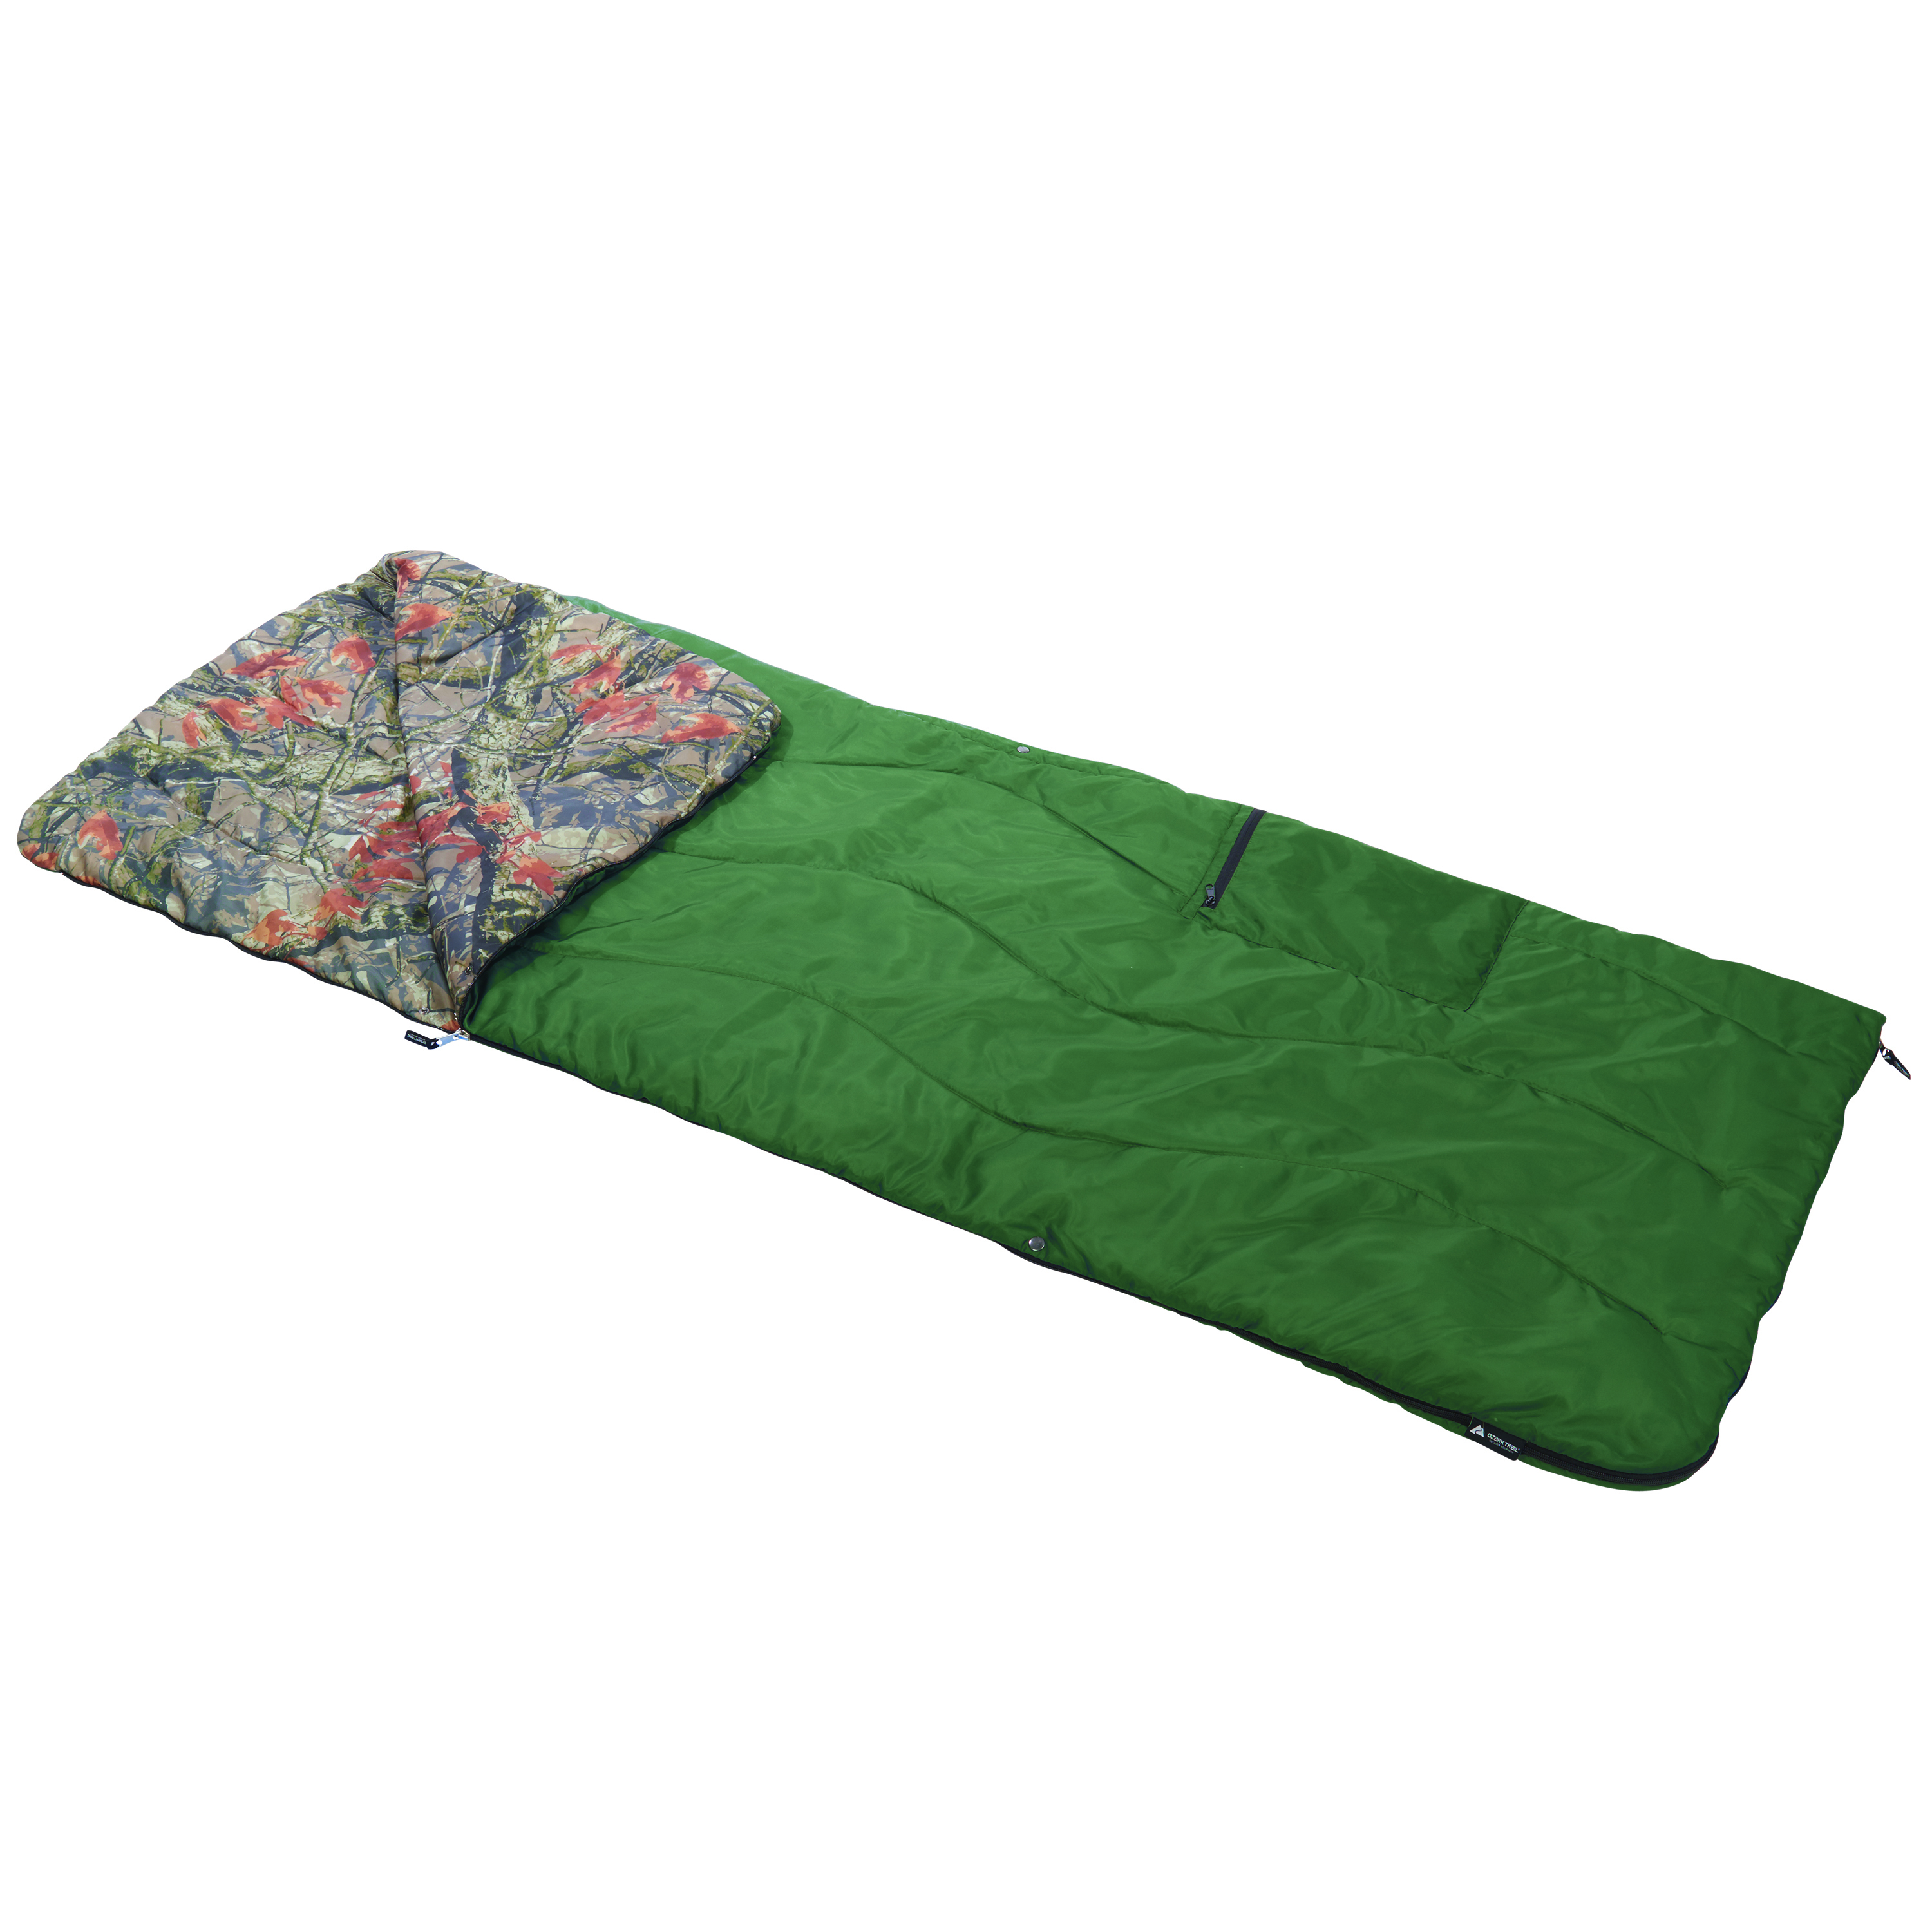 Ozark Trail Crystal Caverns 4-in-1 Convertible Field Poncho - image 2 of 2